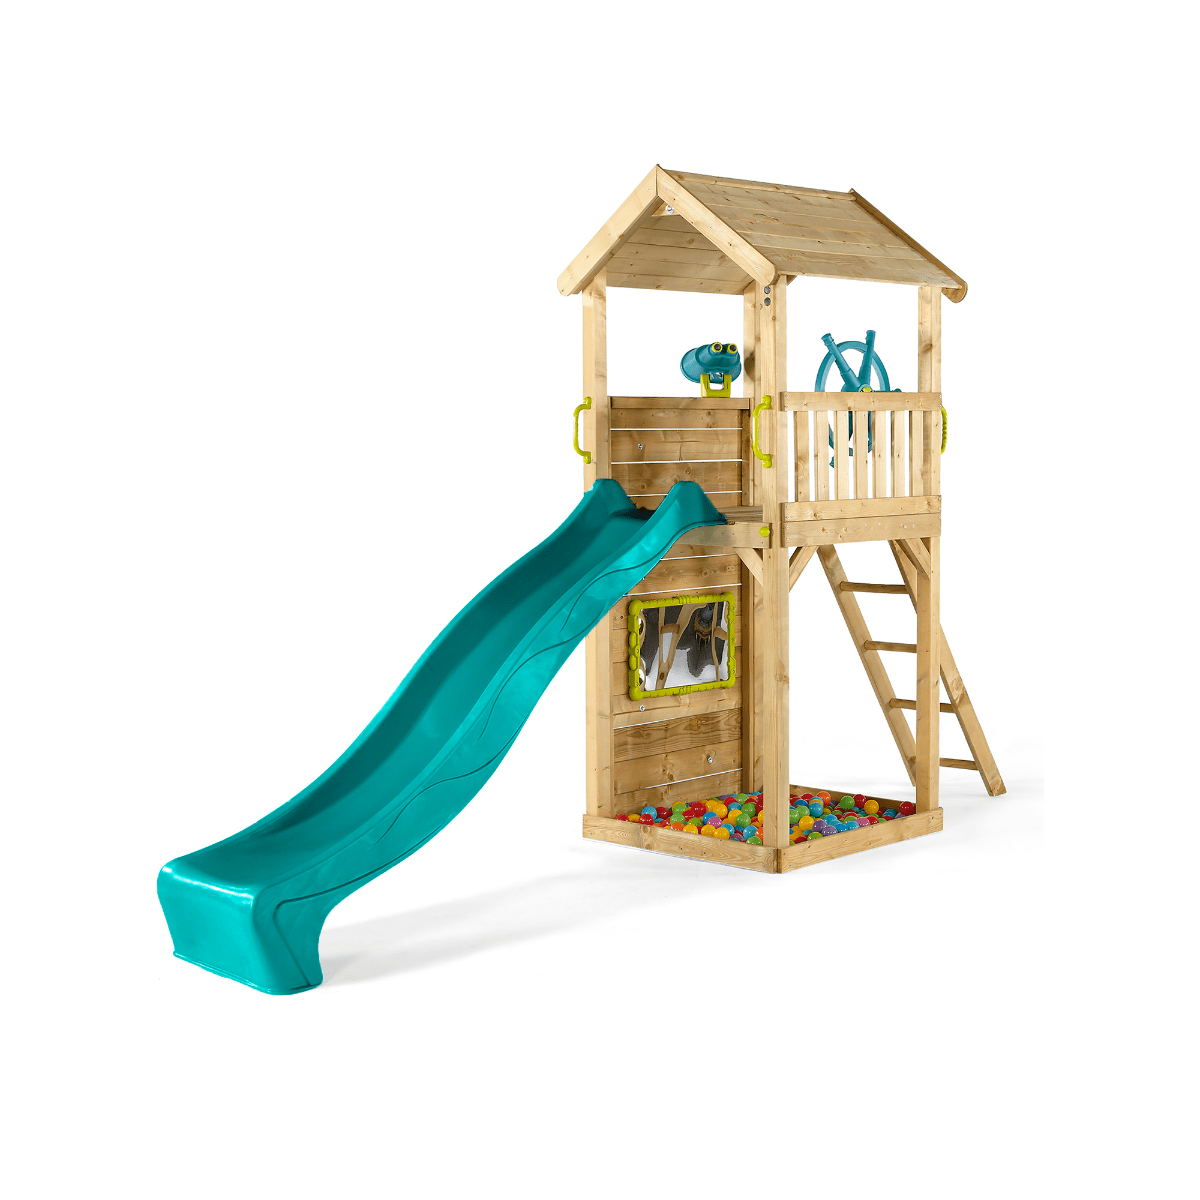 Adventure Awaits: Plum Wooden Lookout Tower with Slide for Kids